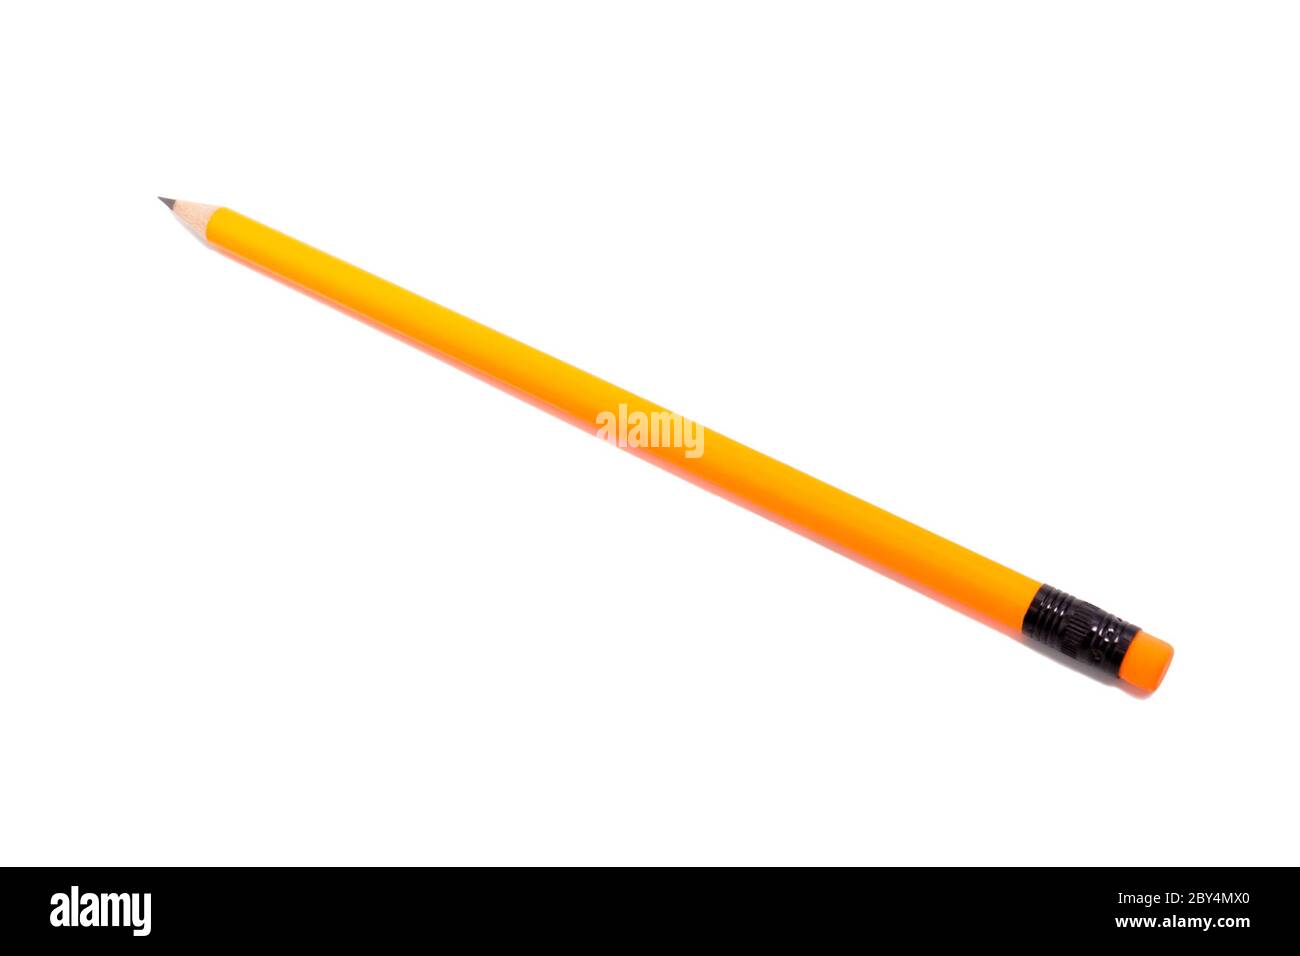 5 pens Cut Out Stock Images & Pictures - Alamy